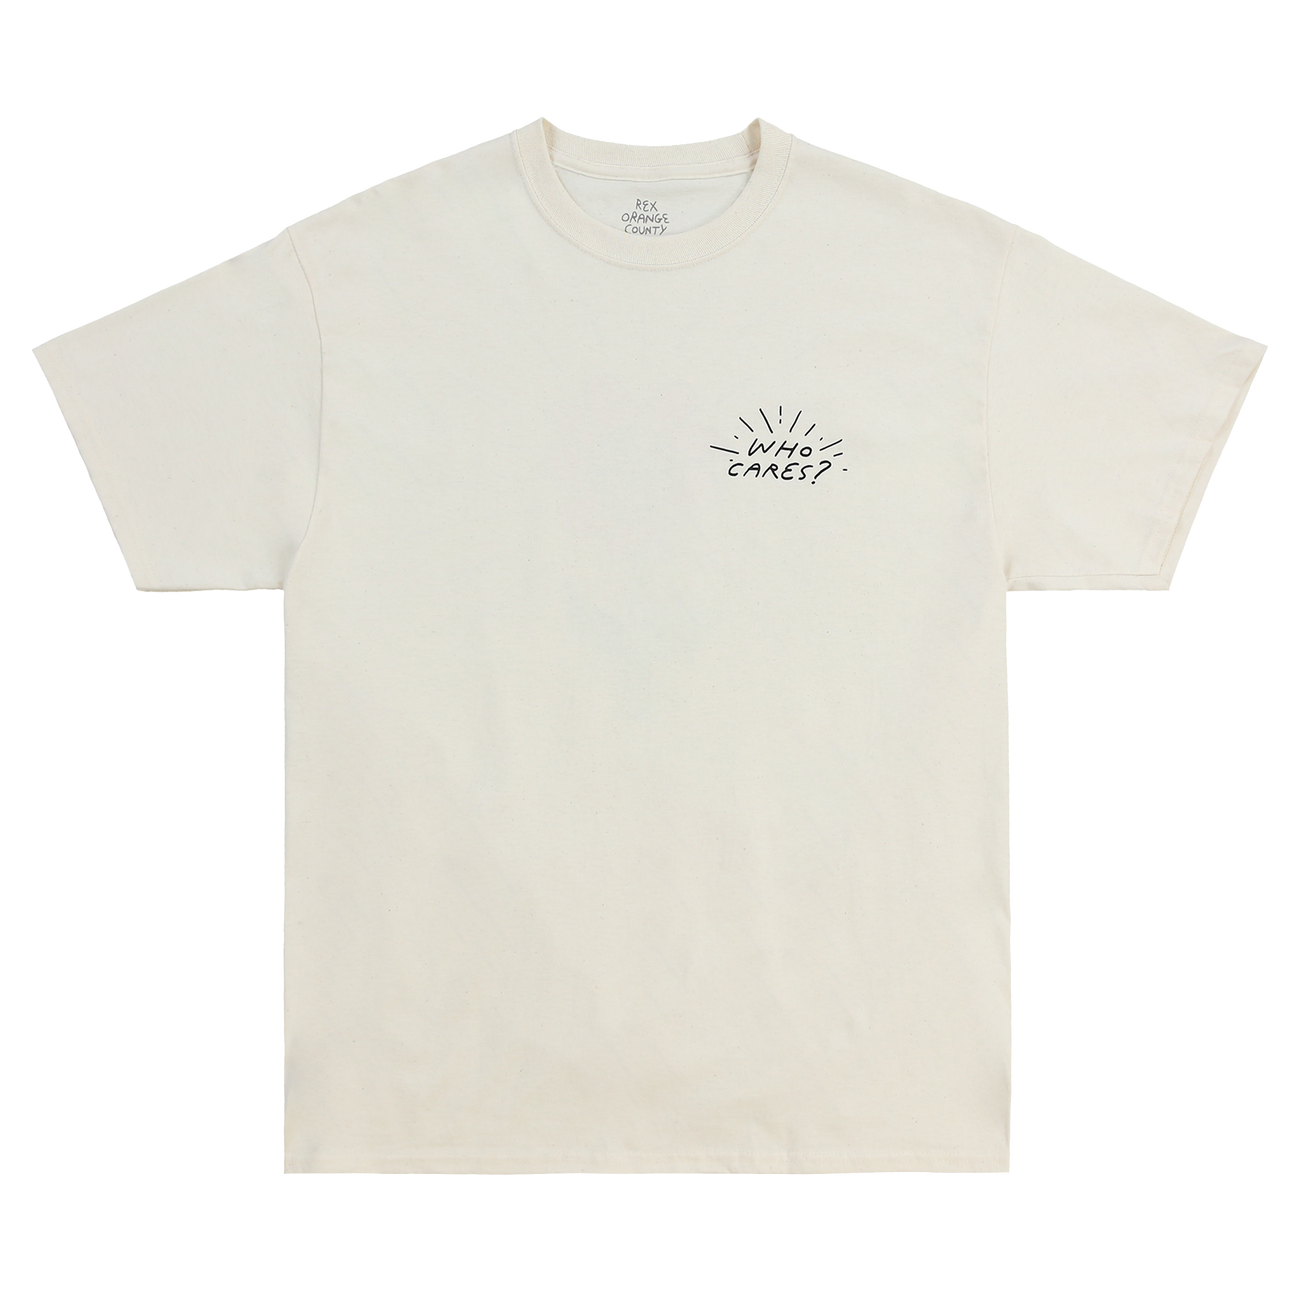 Rex Orange County | The Official Store